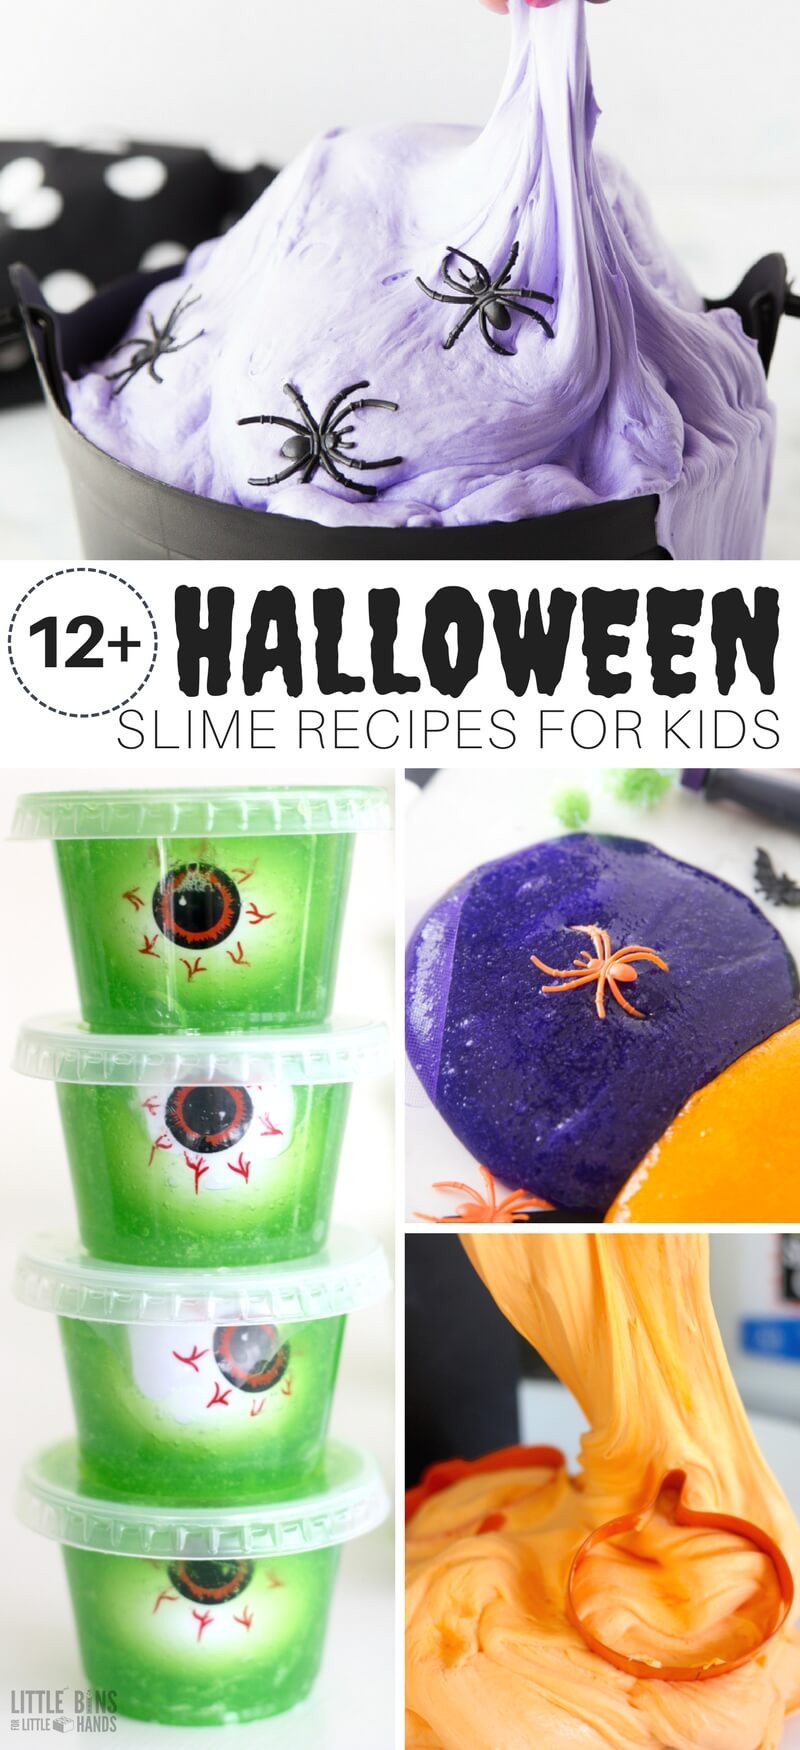 Slime Recipes For Kids
 Halloween Slime Recipes and Ideas For Kids To Make Videos